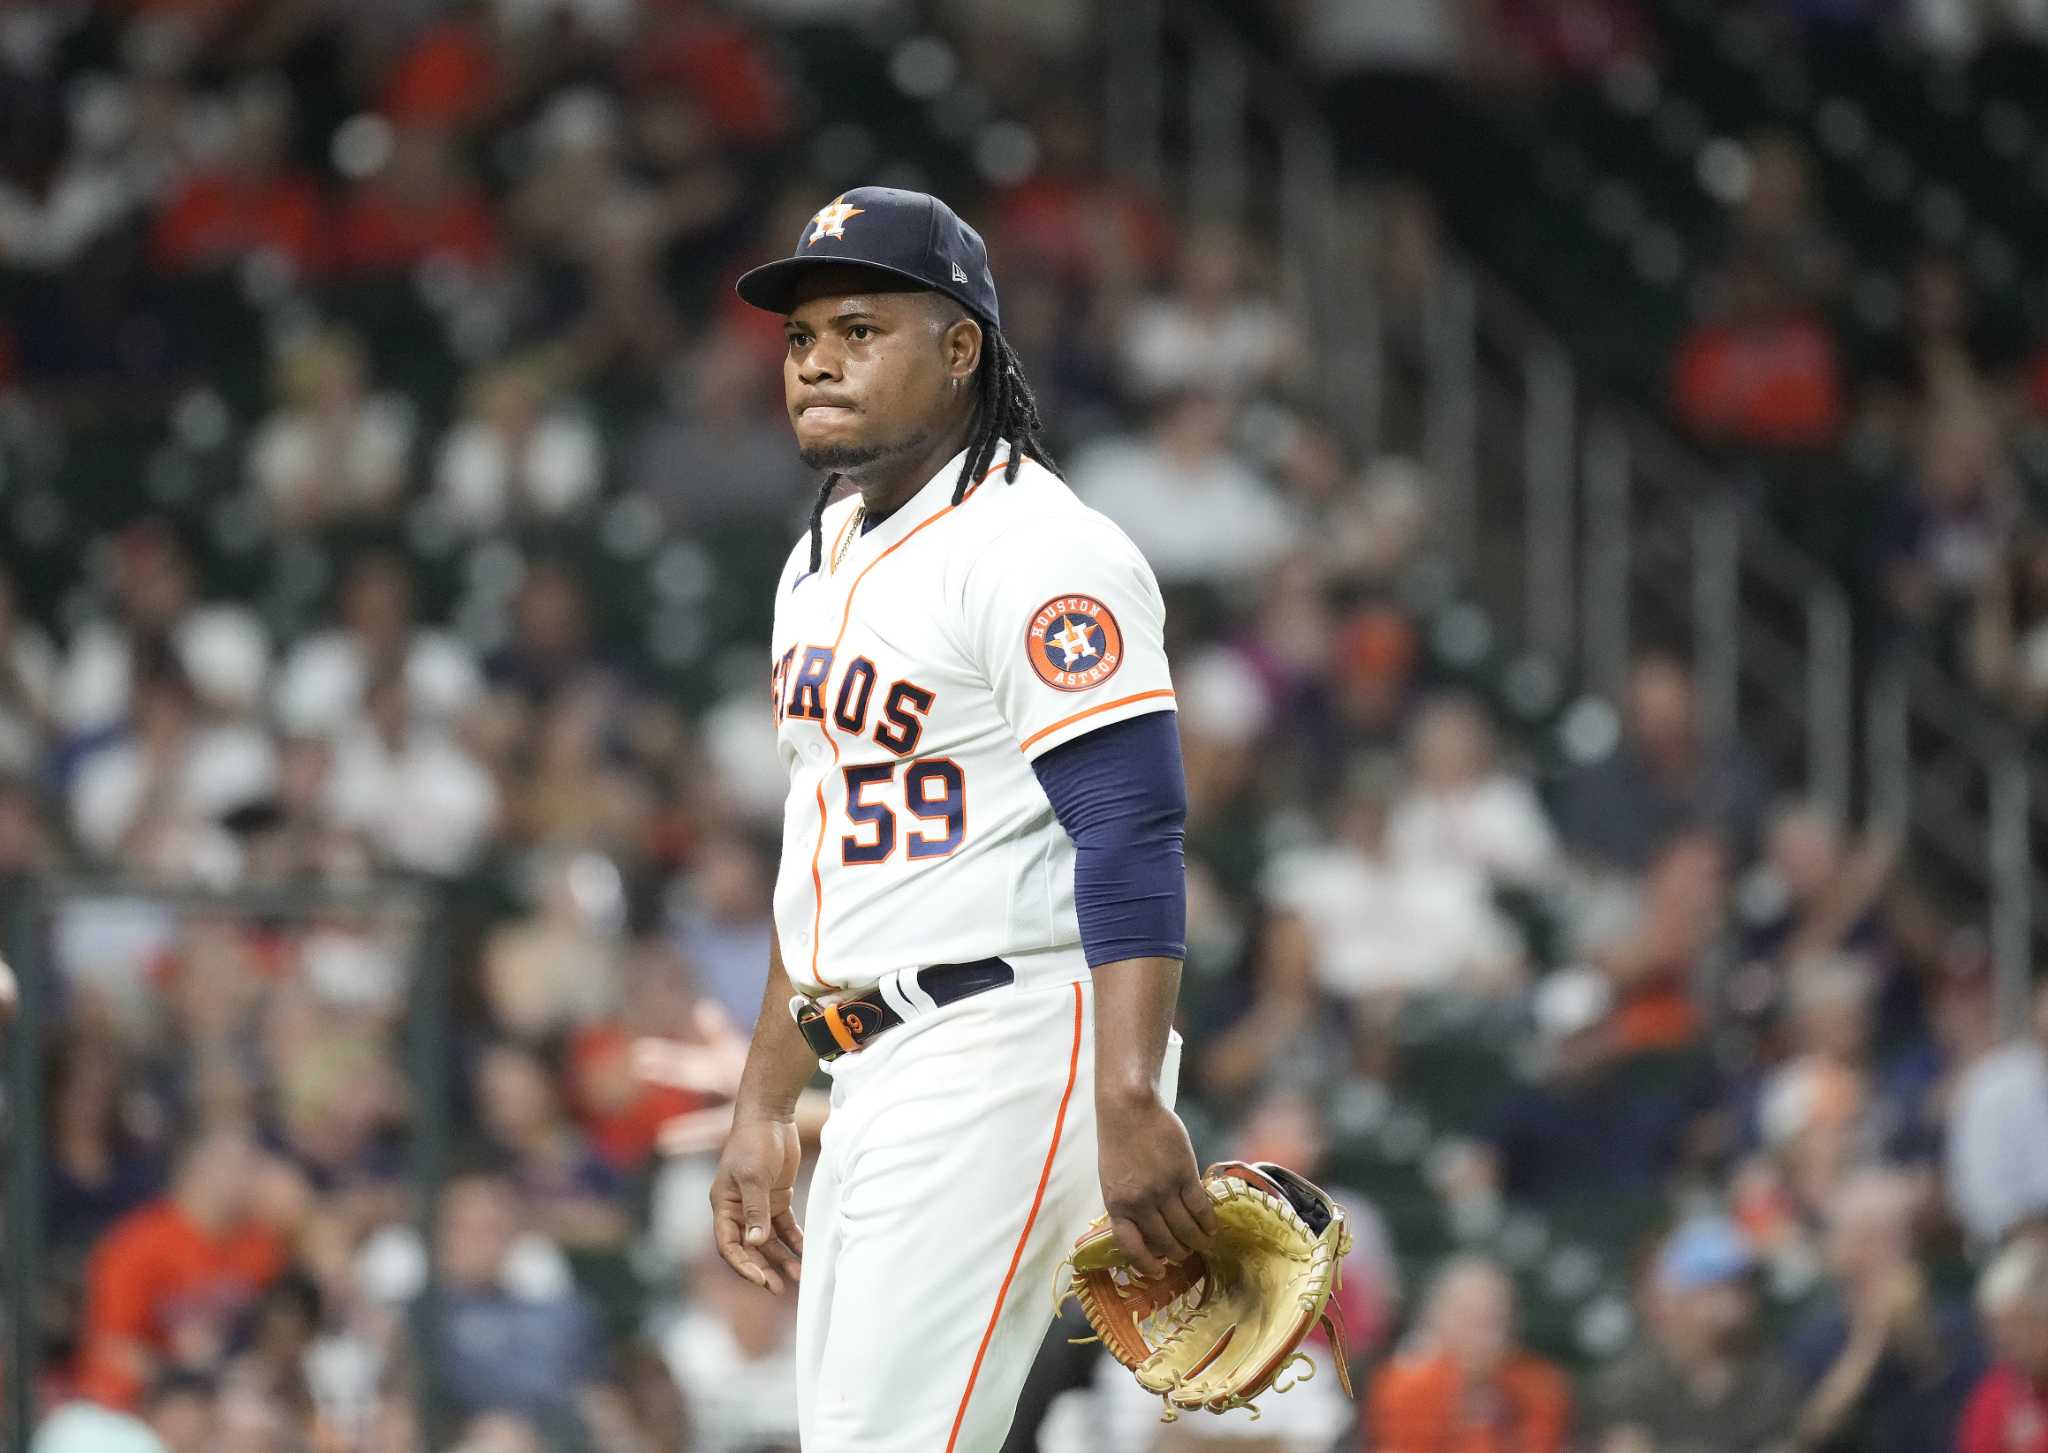 Astros continue to seek answer at first base after loss